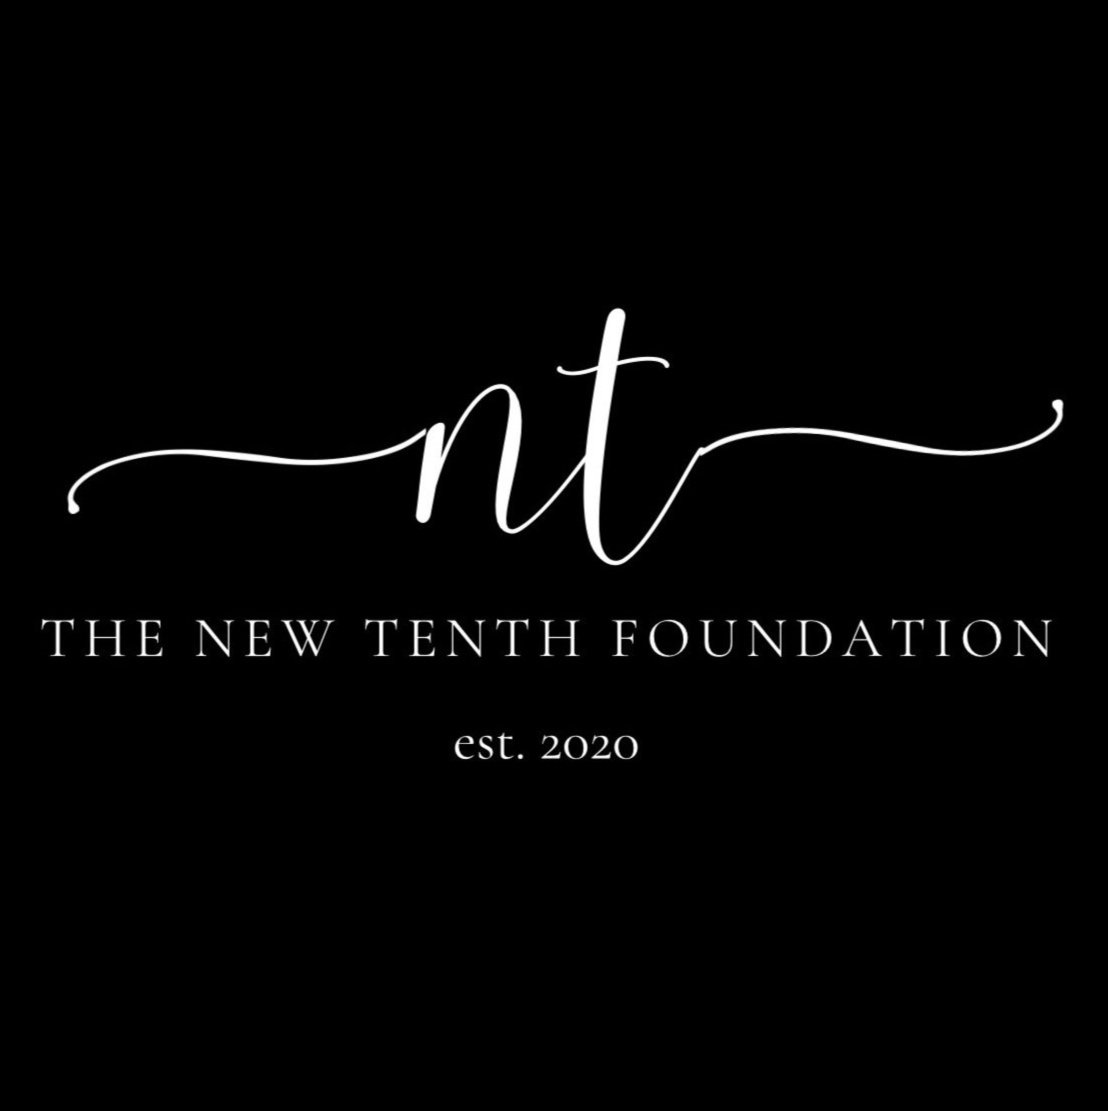 THE NEW TENTH FOUNDATION